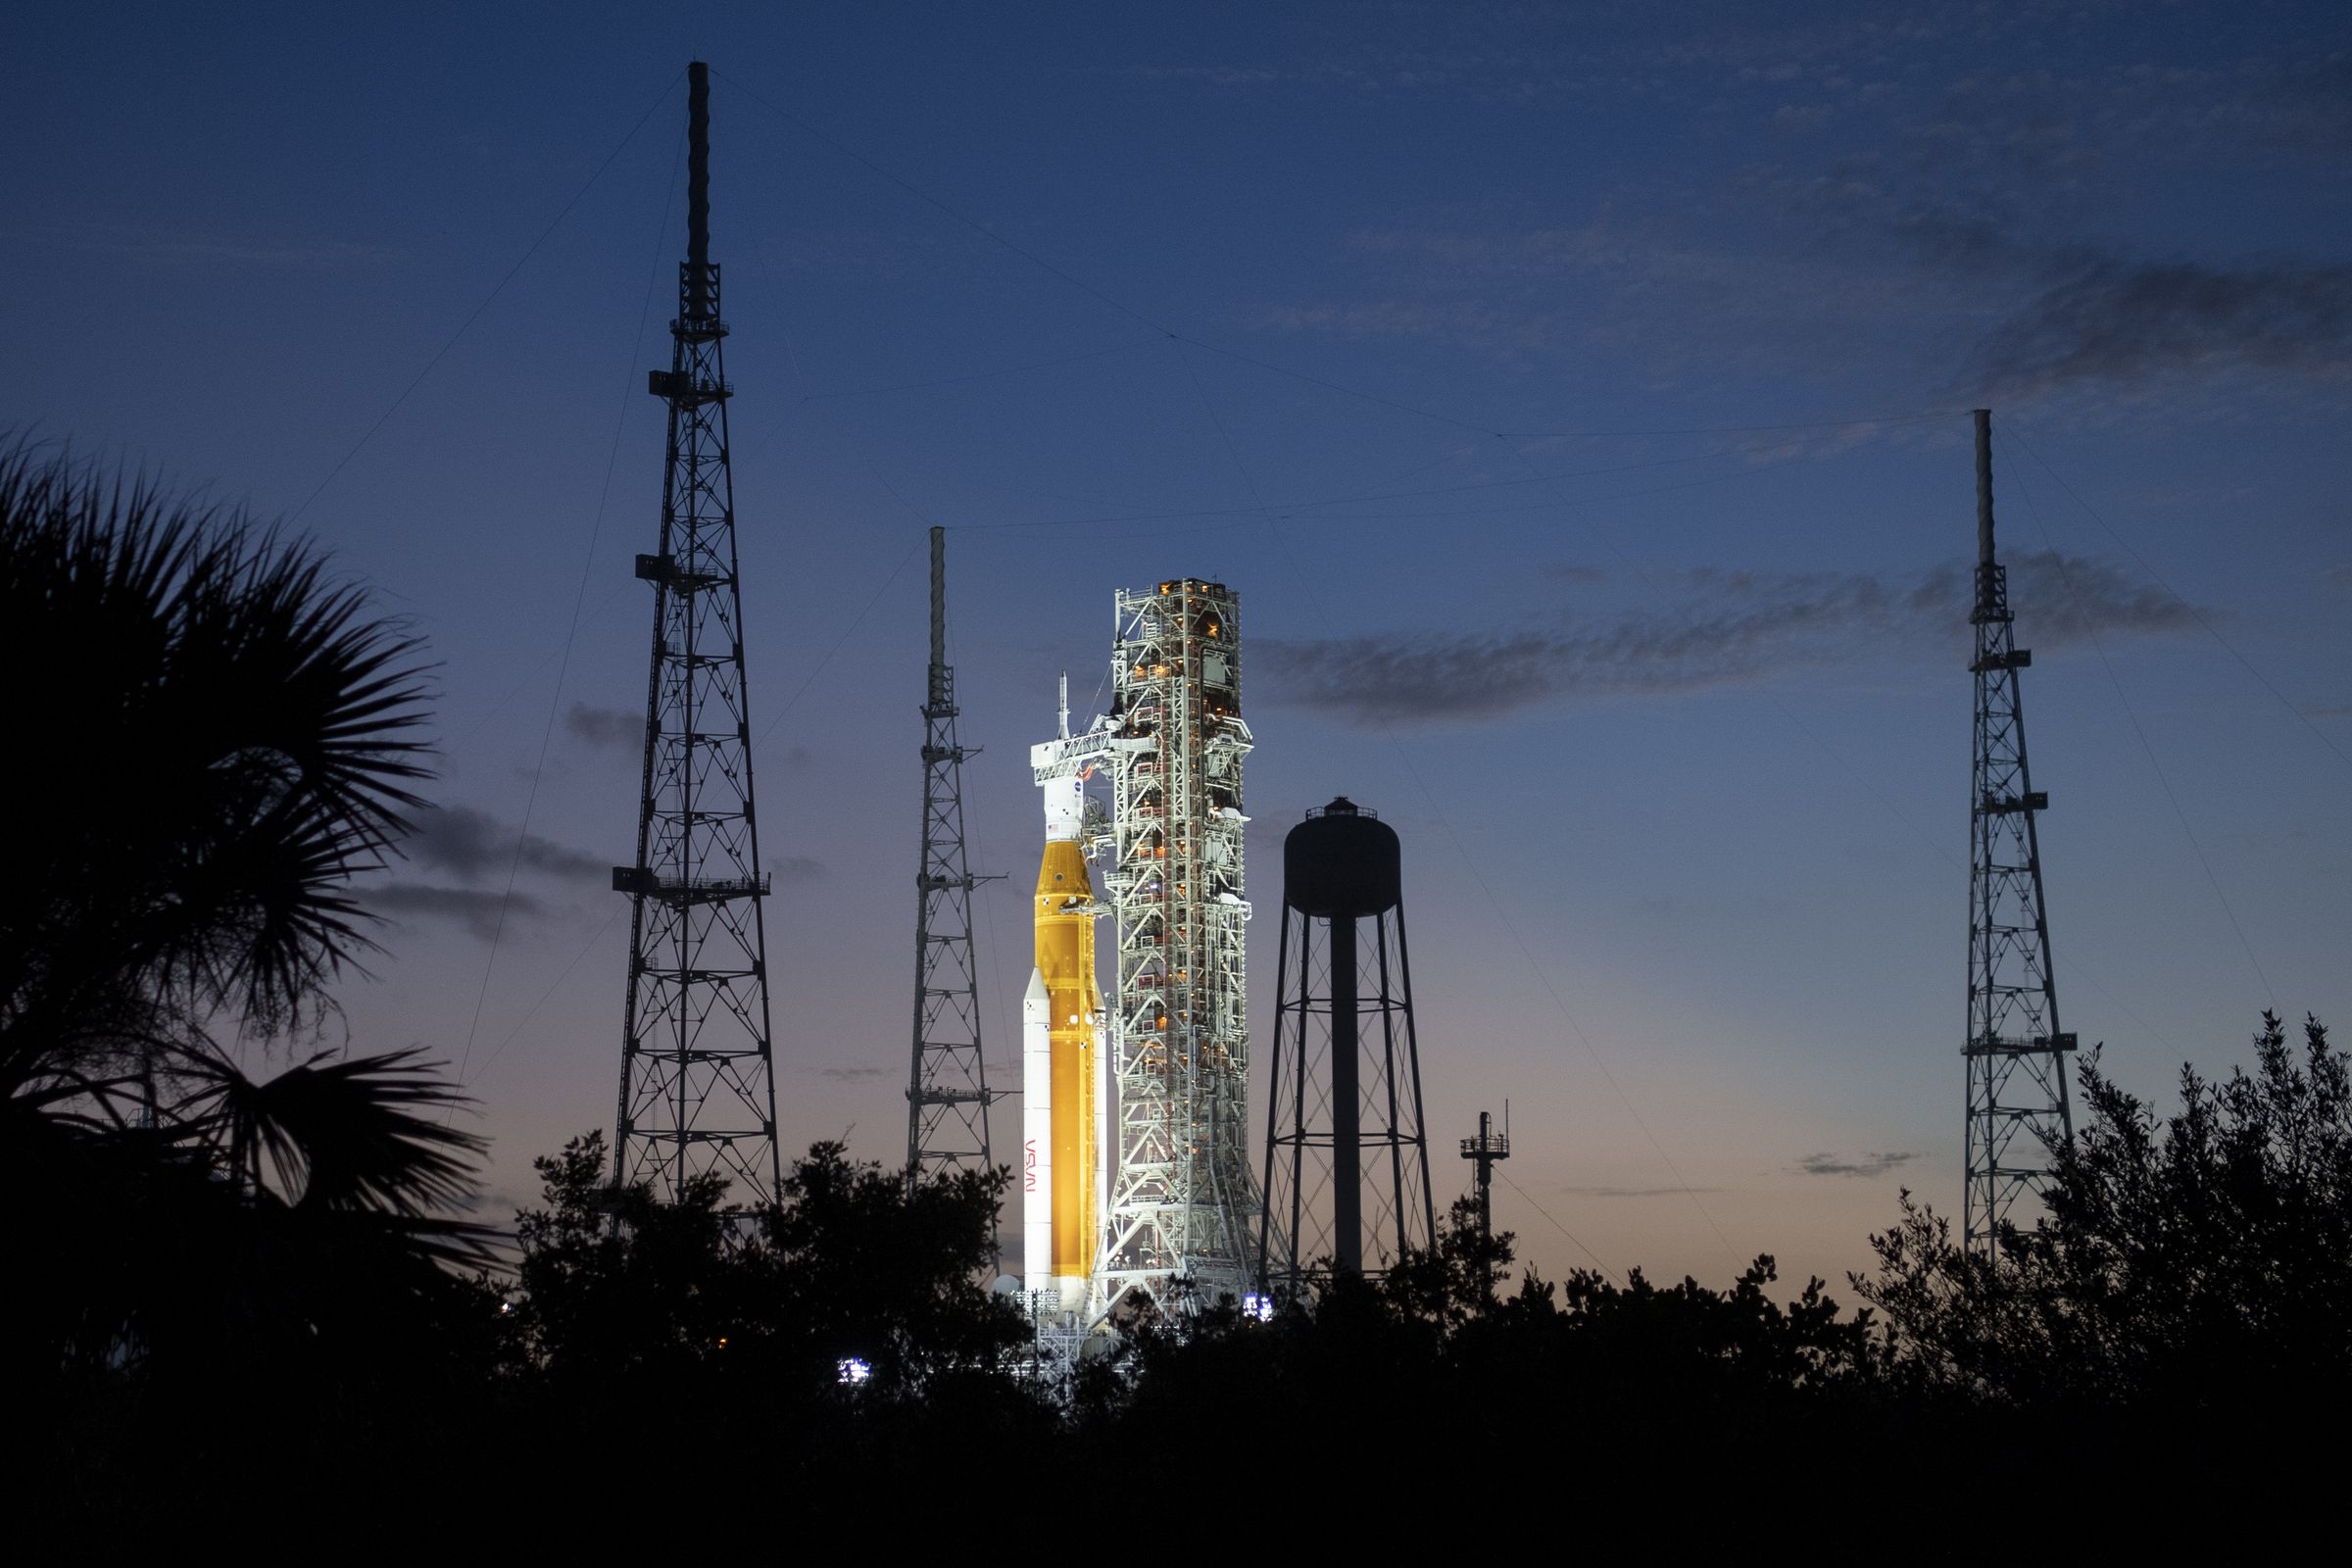 An illuminated rocket sits on a launchpad surrounded by equipment, silhouetted against a dusk sky.